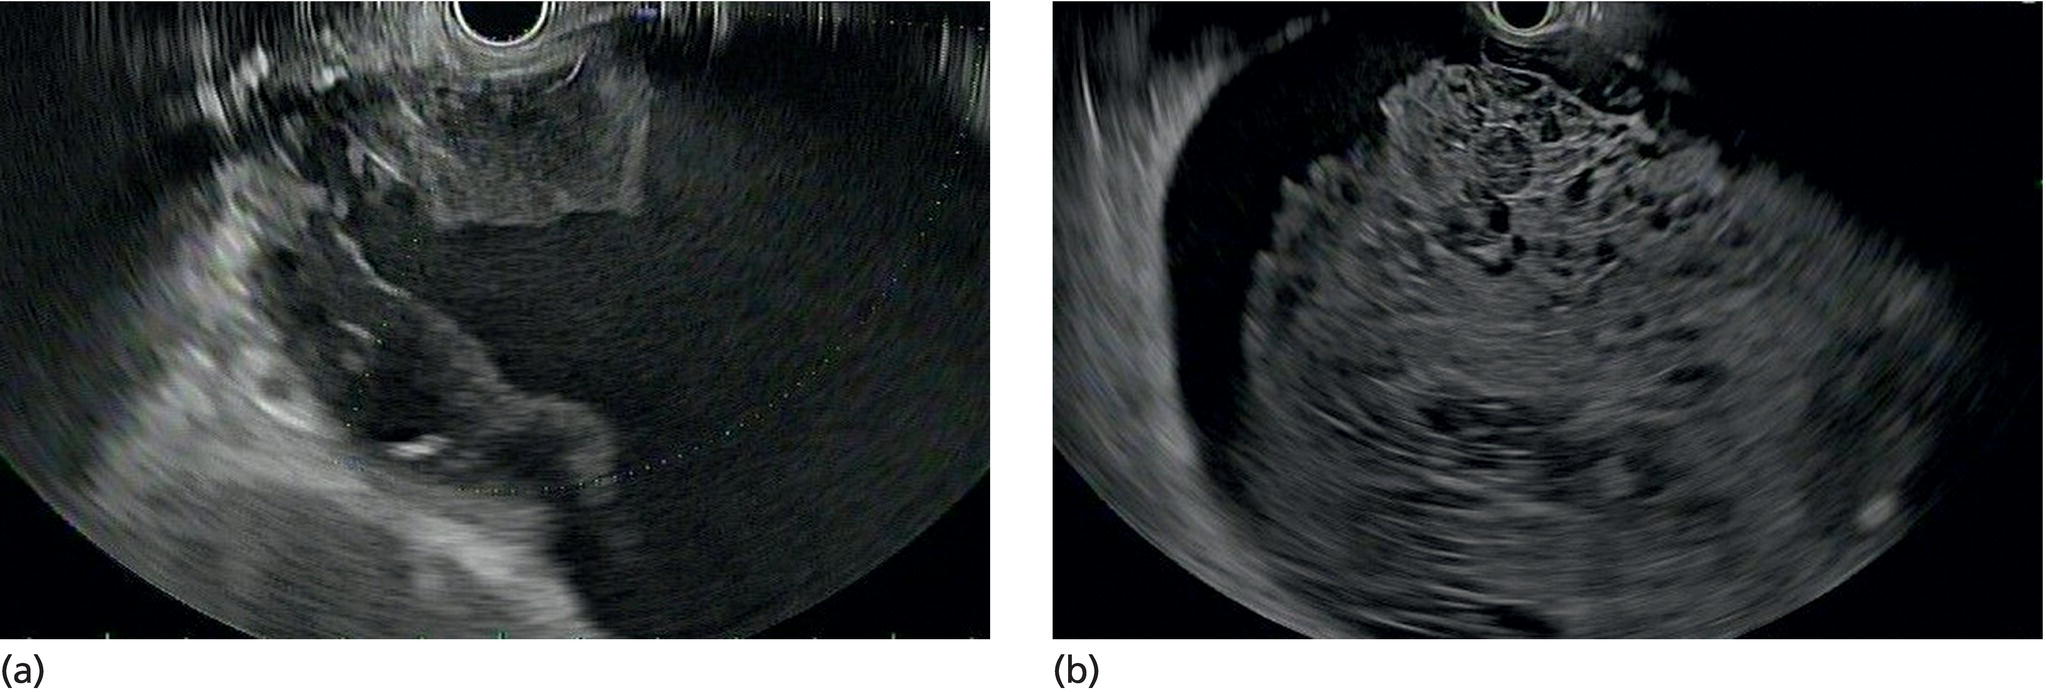 Photos depict (a, b) Clots and blood products within a peripancreatic collection which can have similar appearance to solid necrosis.